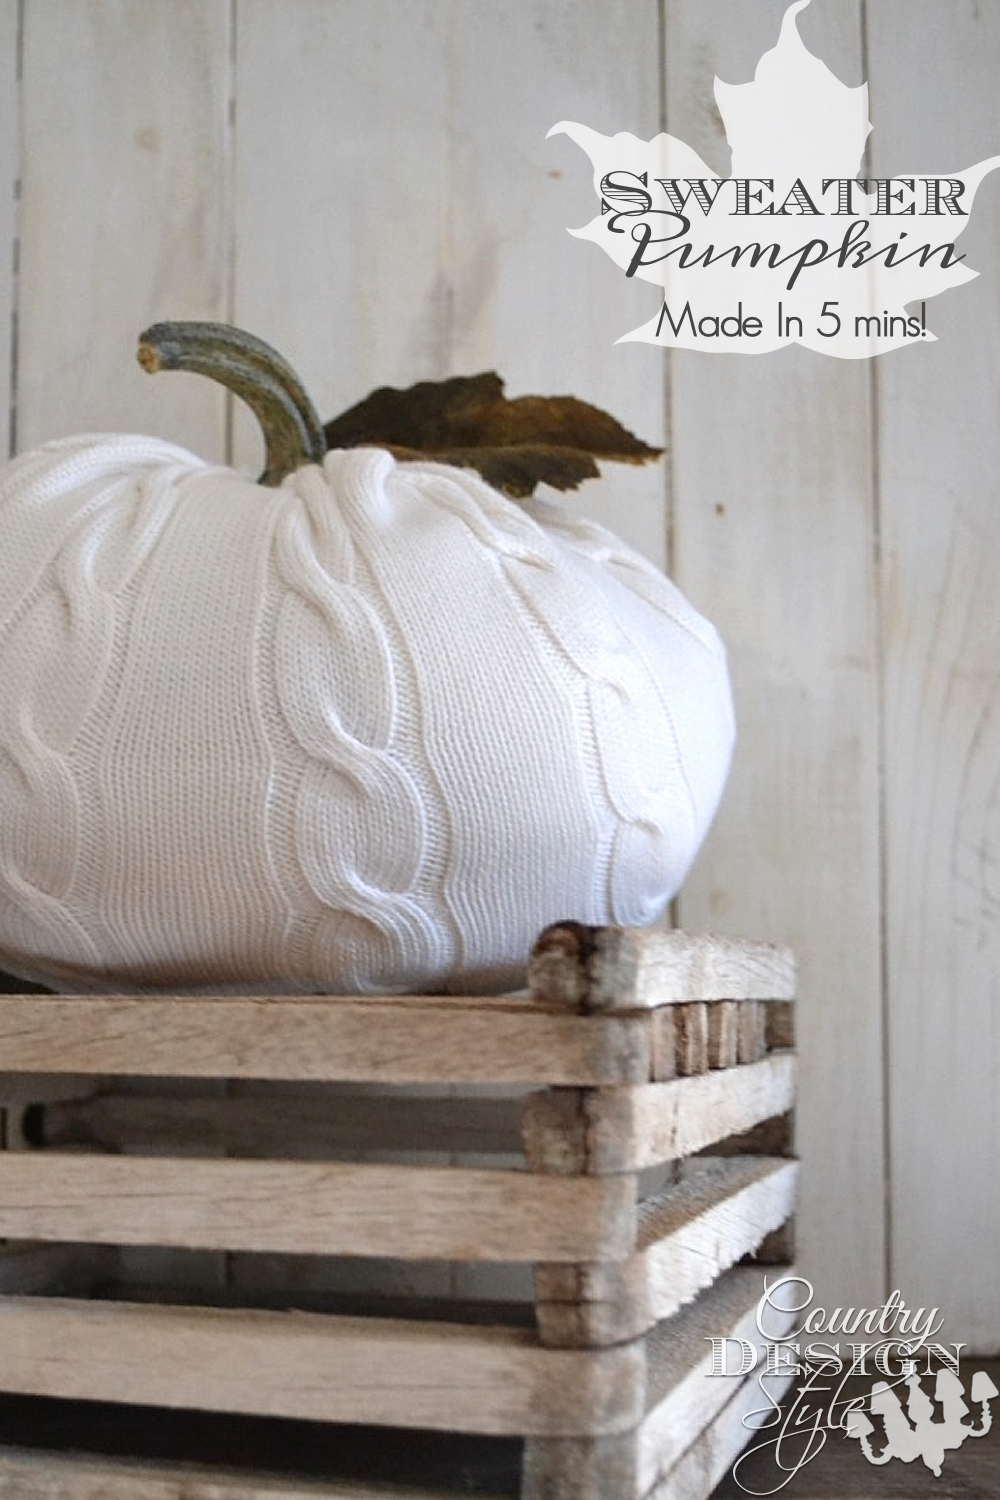 Make the sweater pumpkin in 5 minutes. Minute by minute tutorial on the website! Warm up your pumpkin Country Design Style www.countrydesignstyle.com